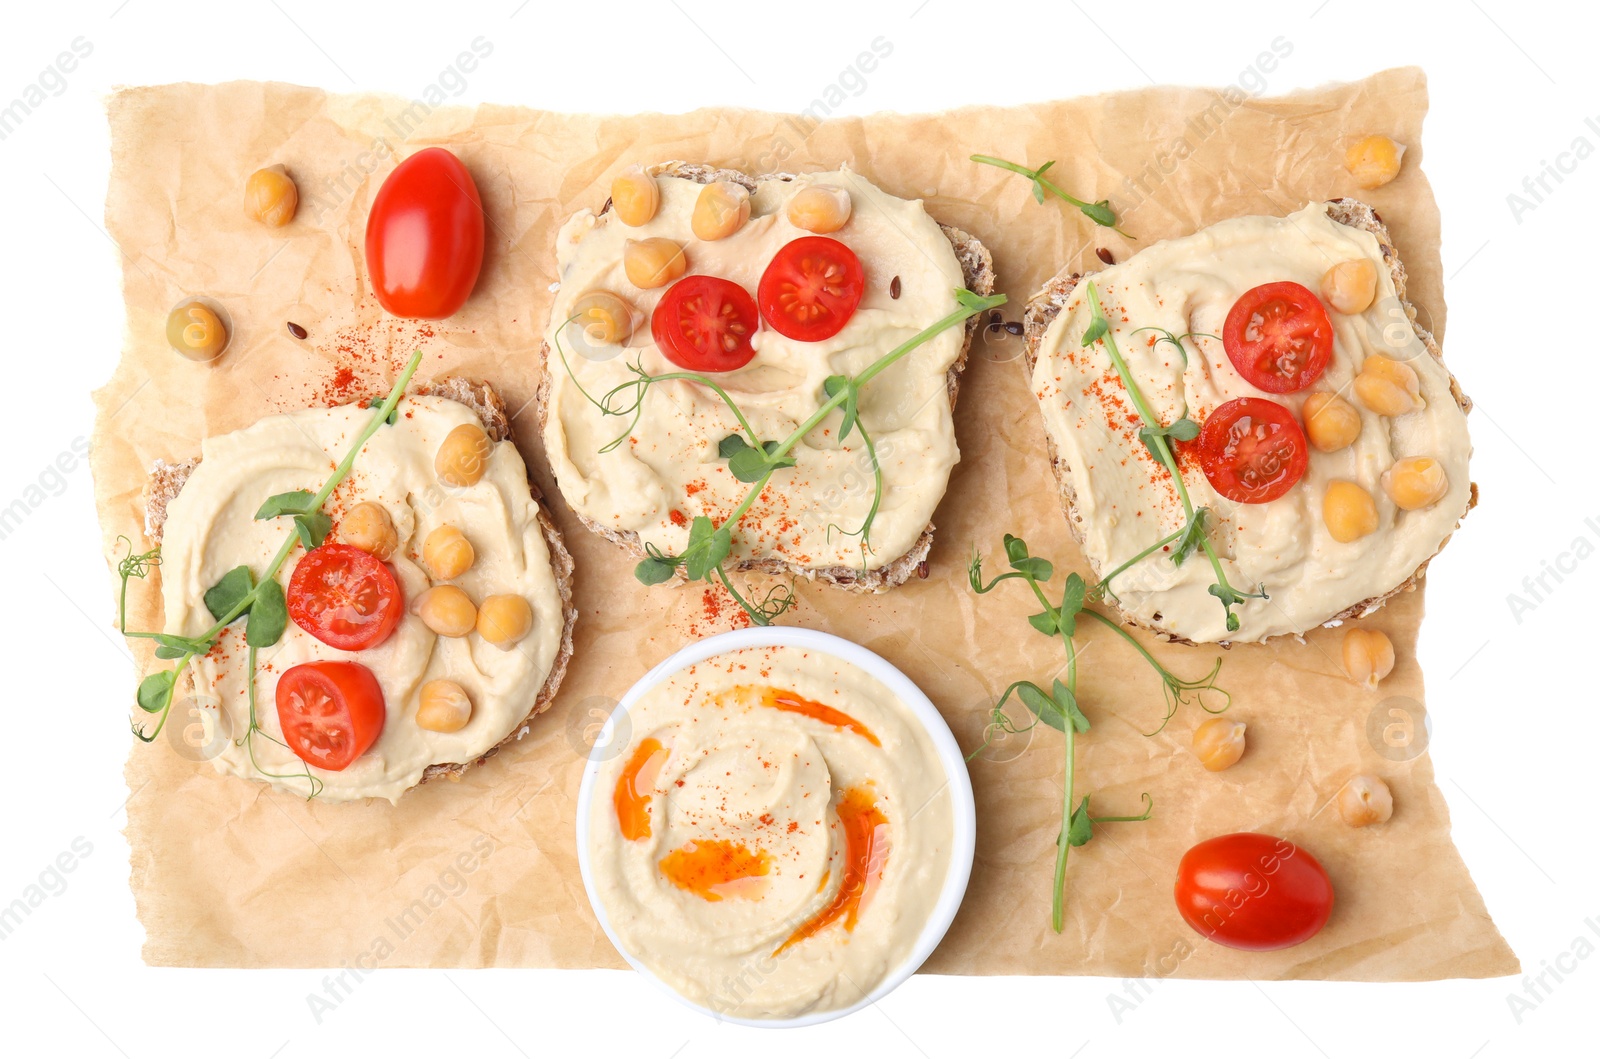 Photo of Delicious sandwiches with hummus and ingredients on white background, top view